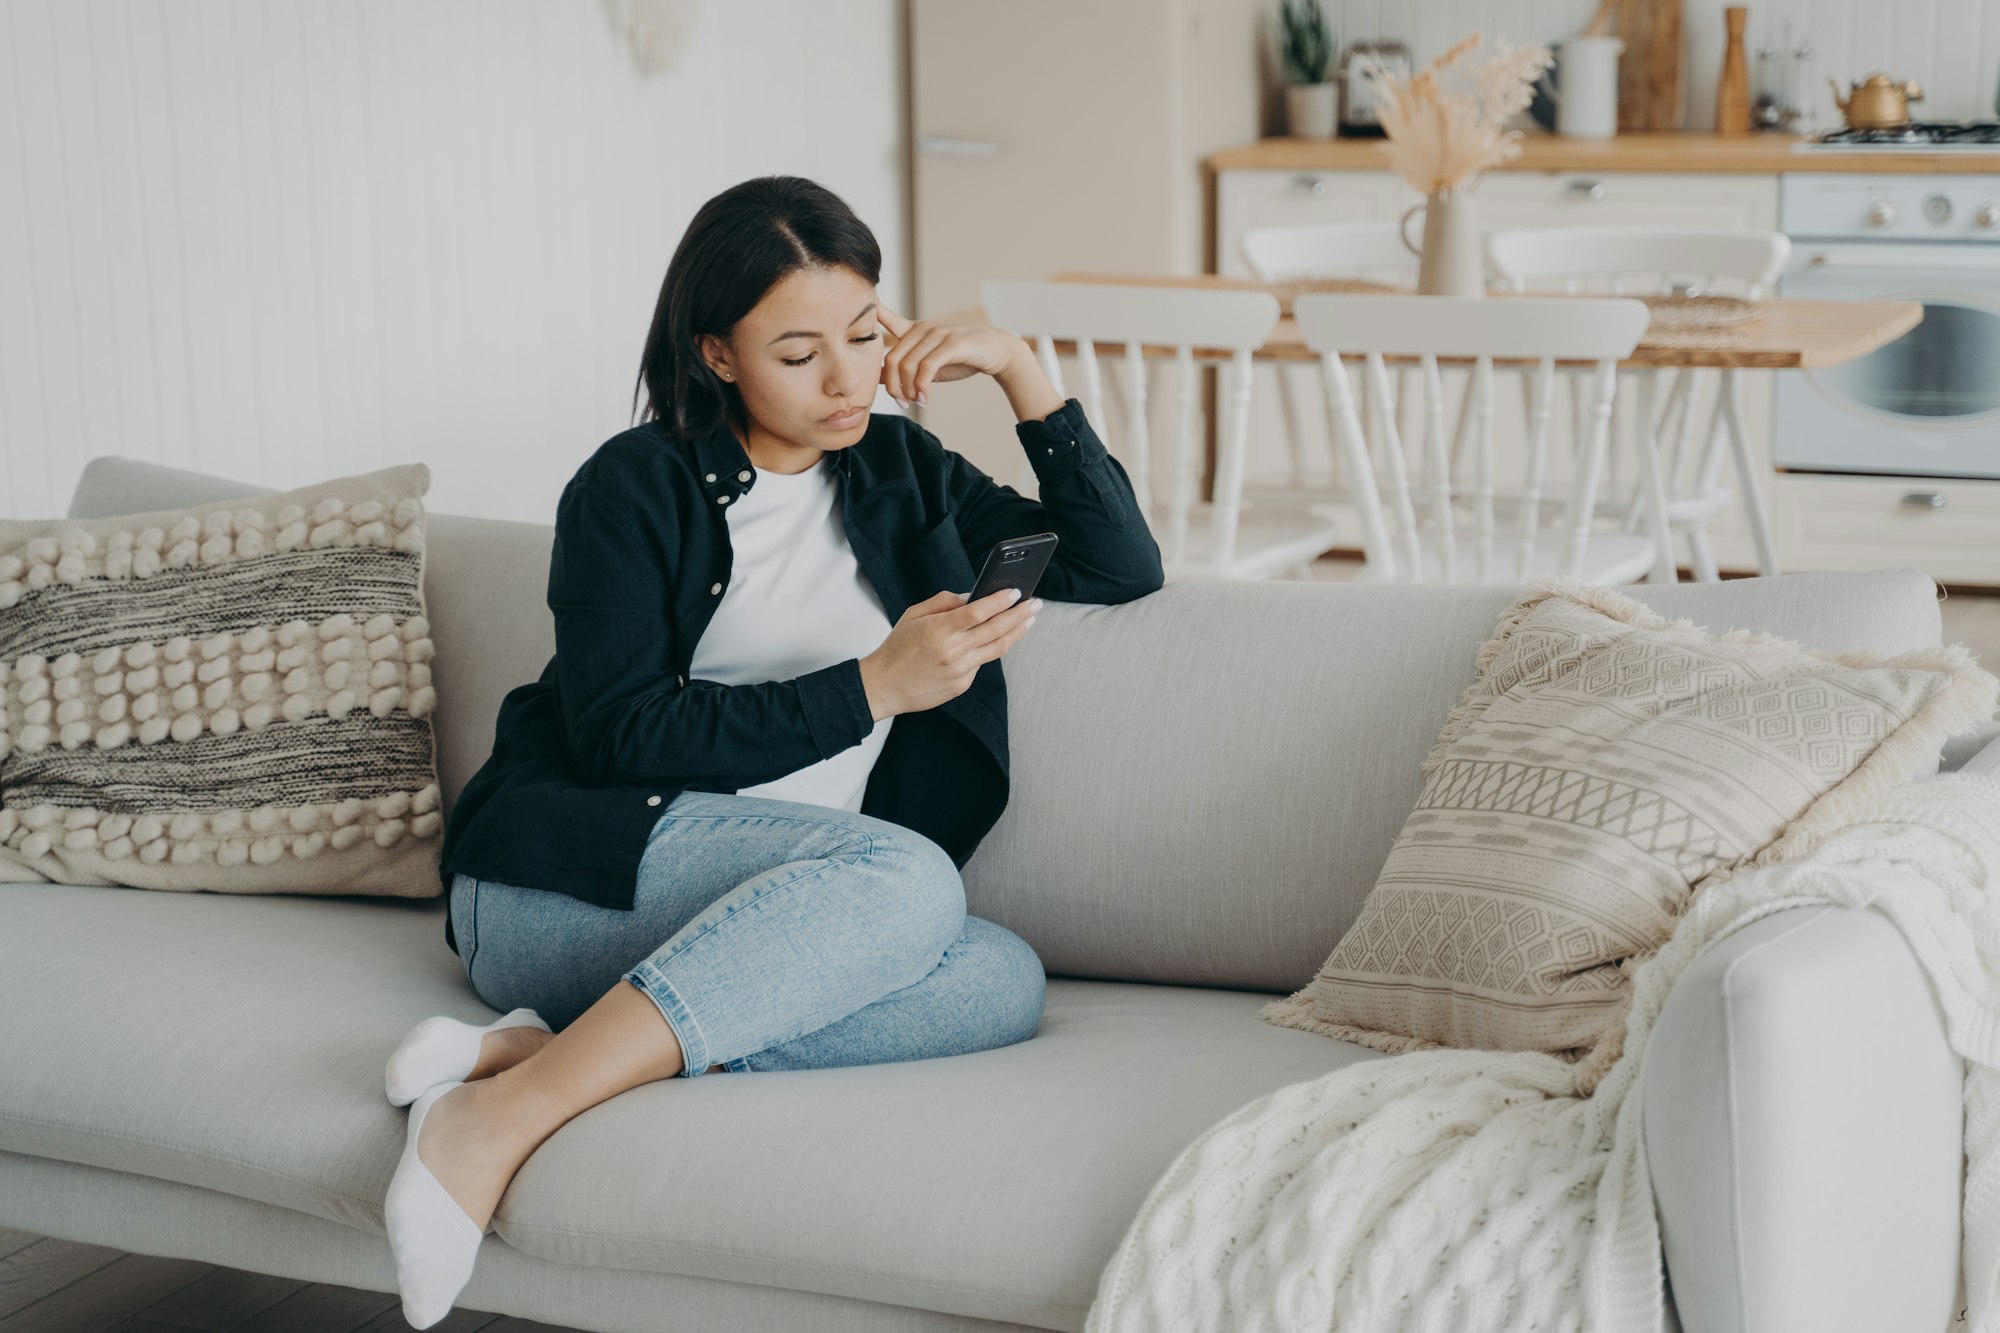 Modern female uses mobile apps at home spending leisure time online with smartphone sitting on couch